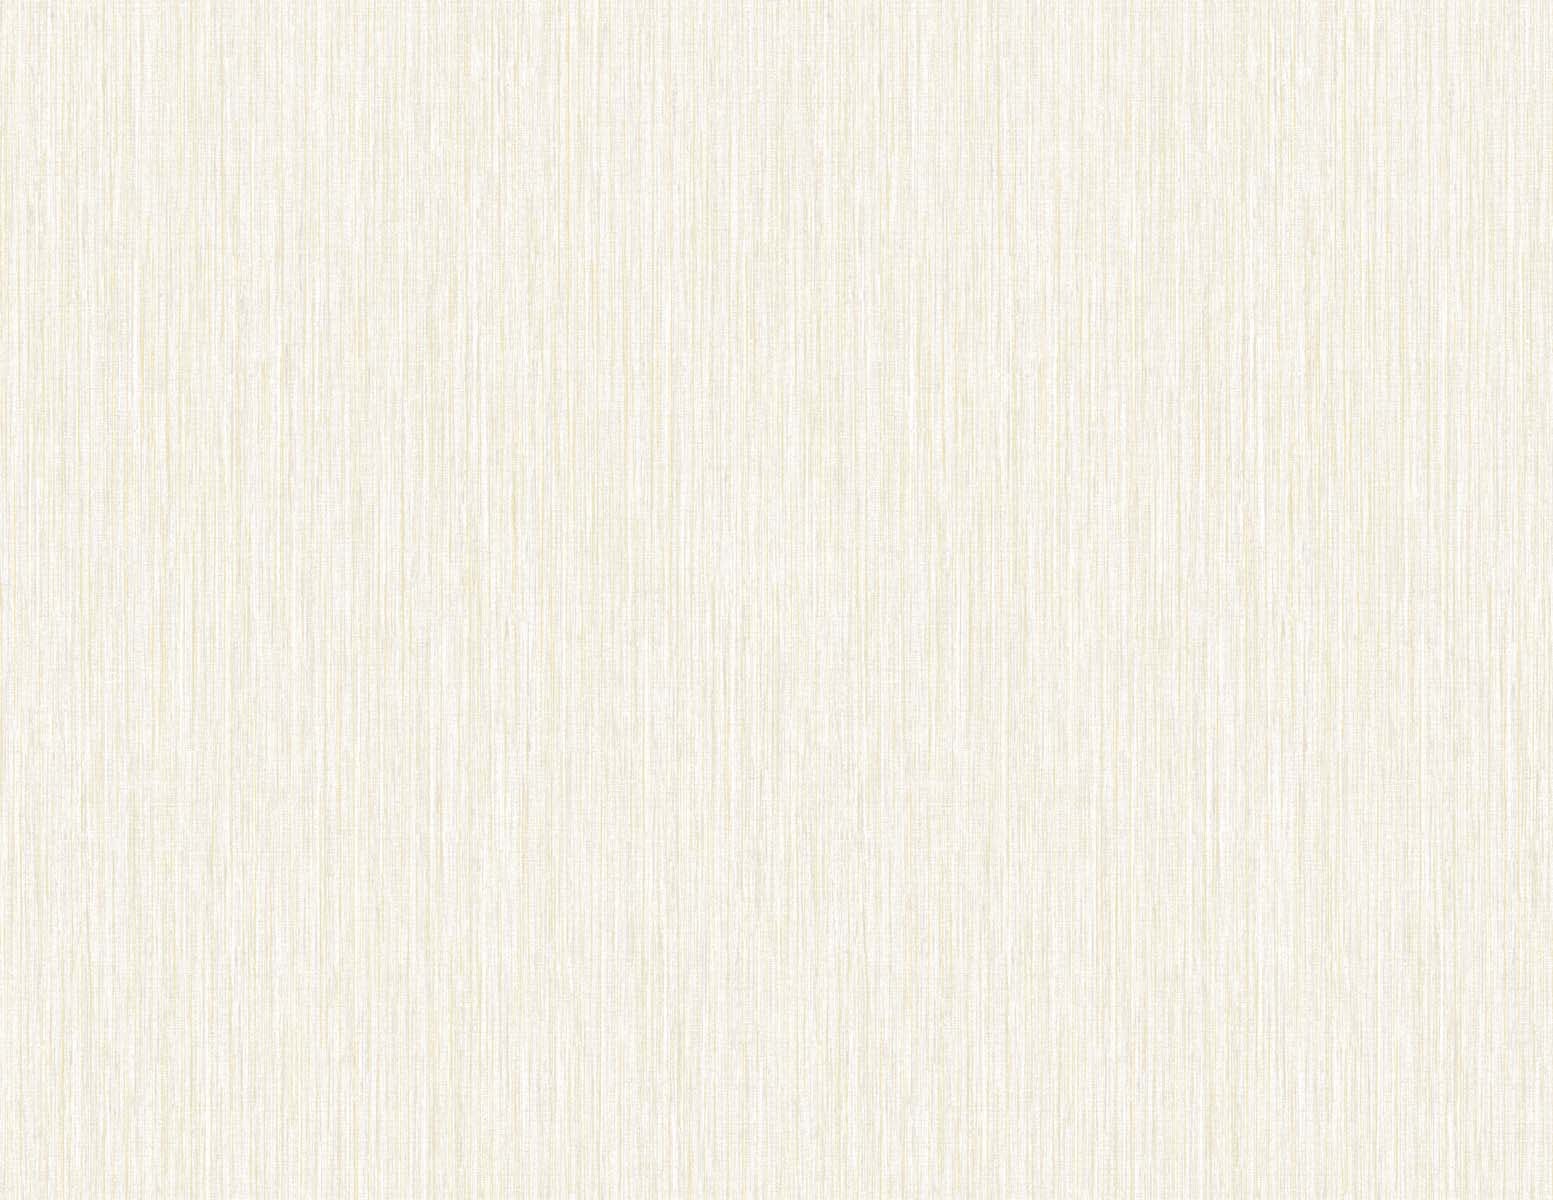 Seabrook Designs TS80935 Even More Textures Vertical Stria  Wallpaper Ivory & Metallic Champagne